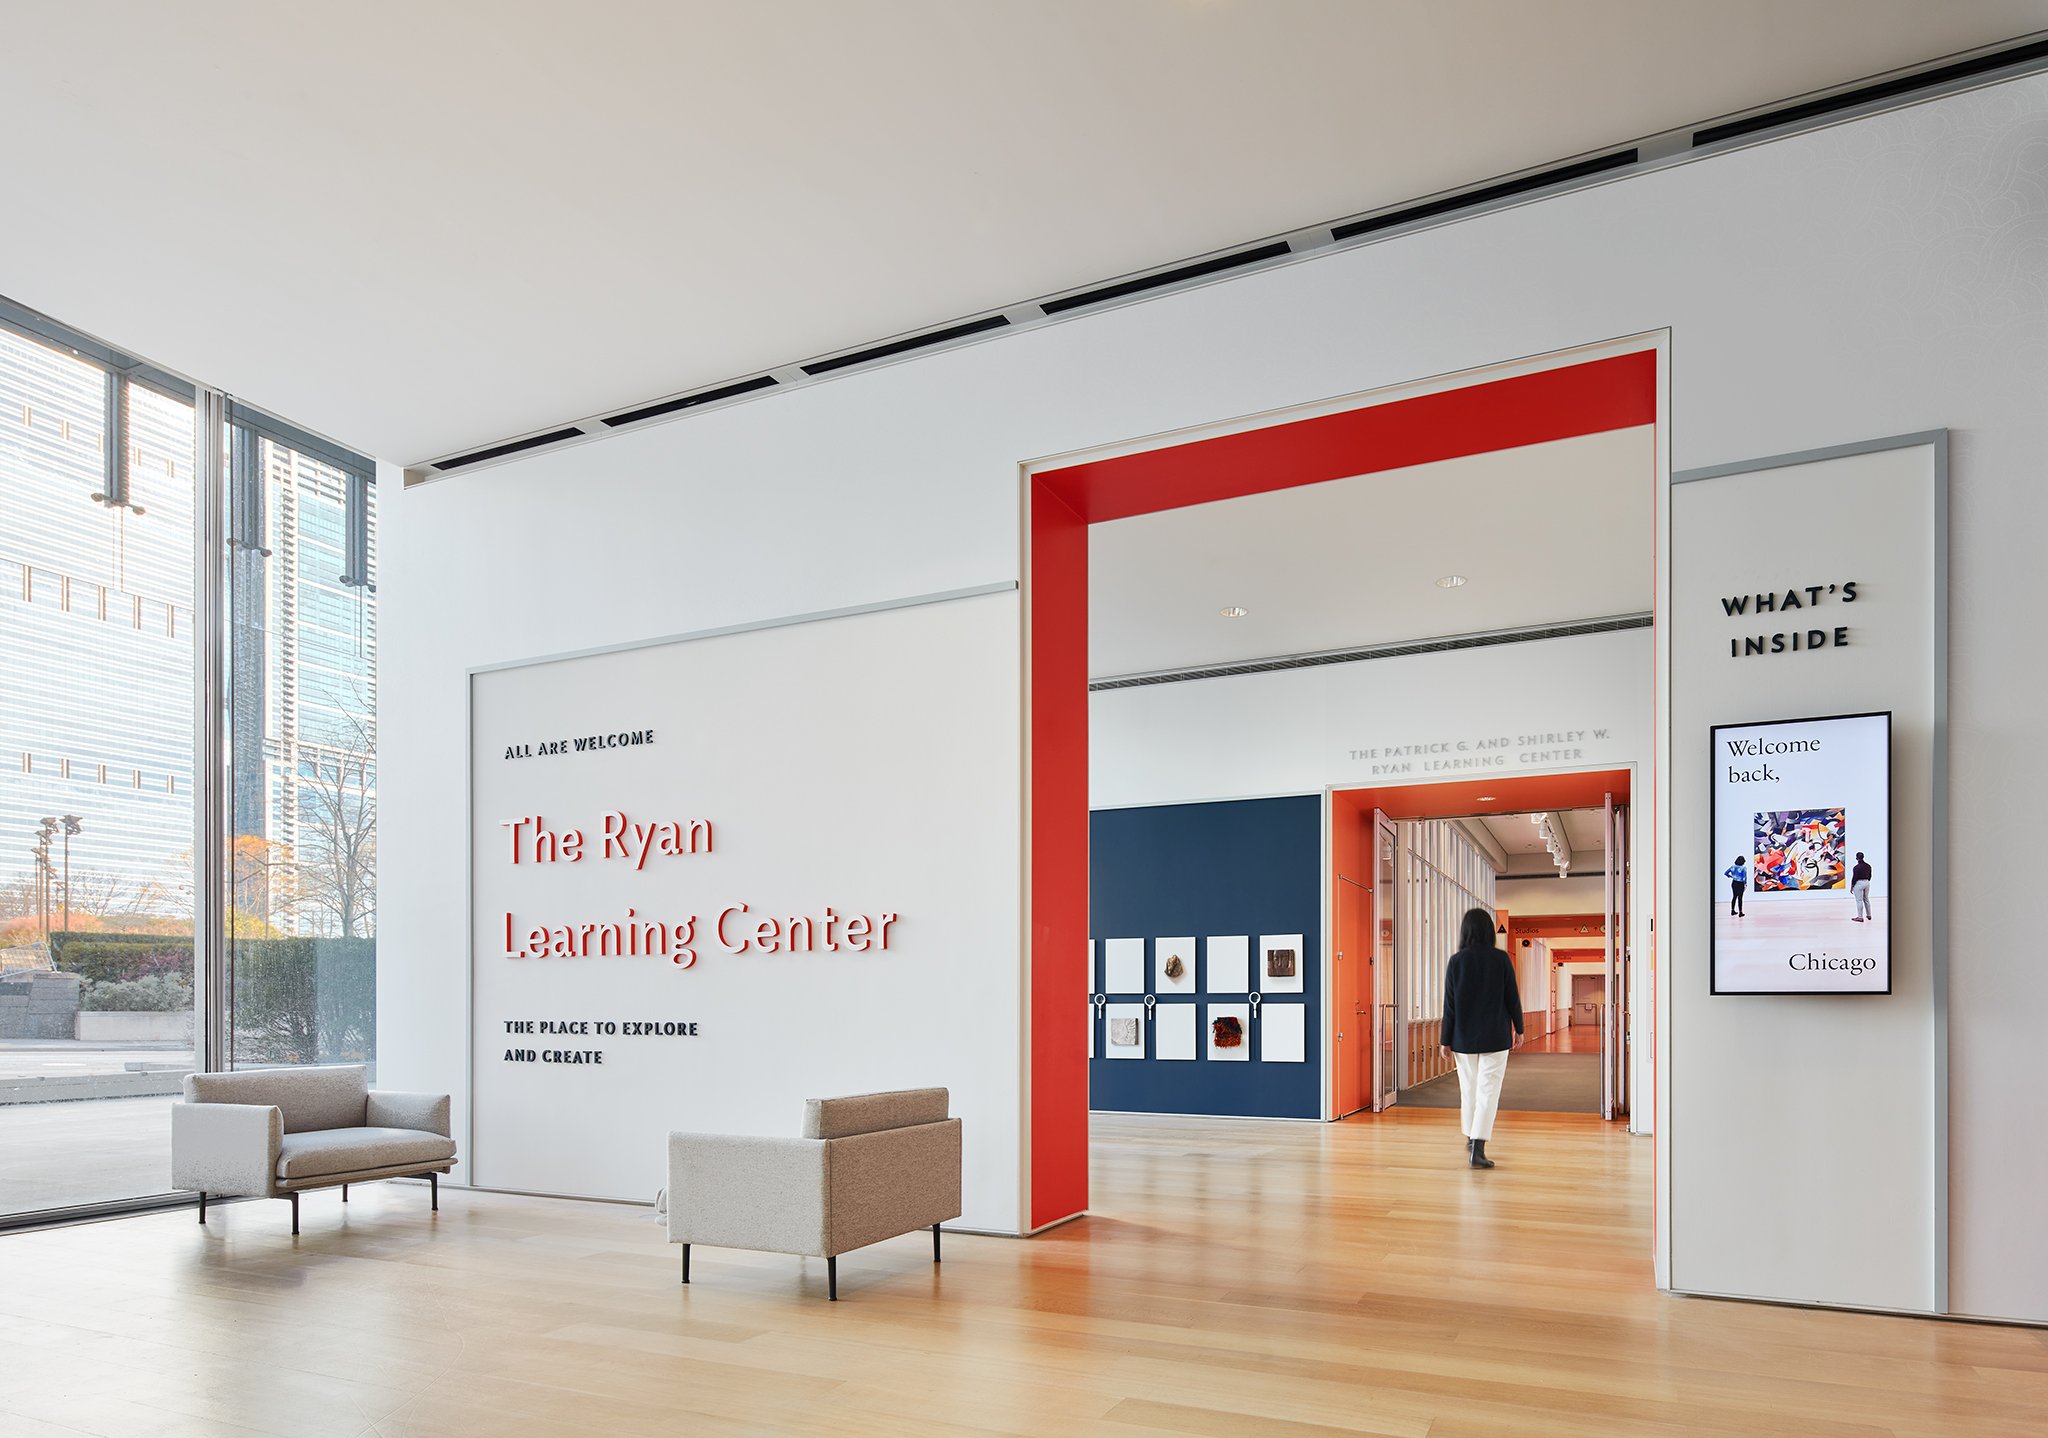  AWARDS  Interior Design’s Best of the Year Award,Government | Institutional,  Honoree,  2022    Ryan Learning Center  Wheeler Kearns  Chicago, IL     Kendall McCaugherty  